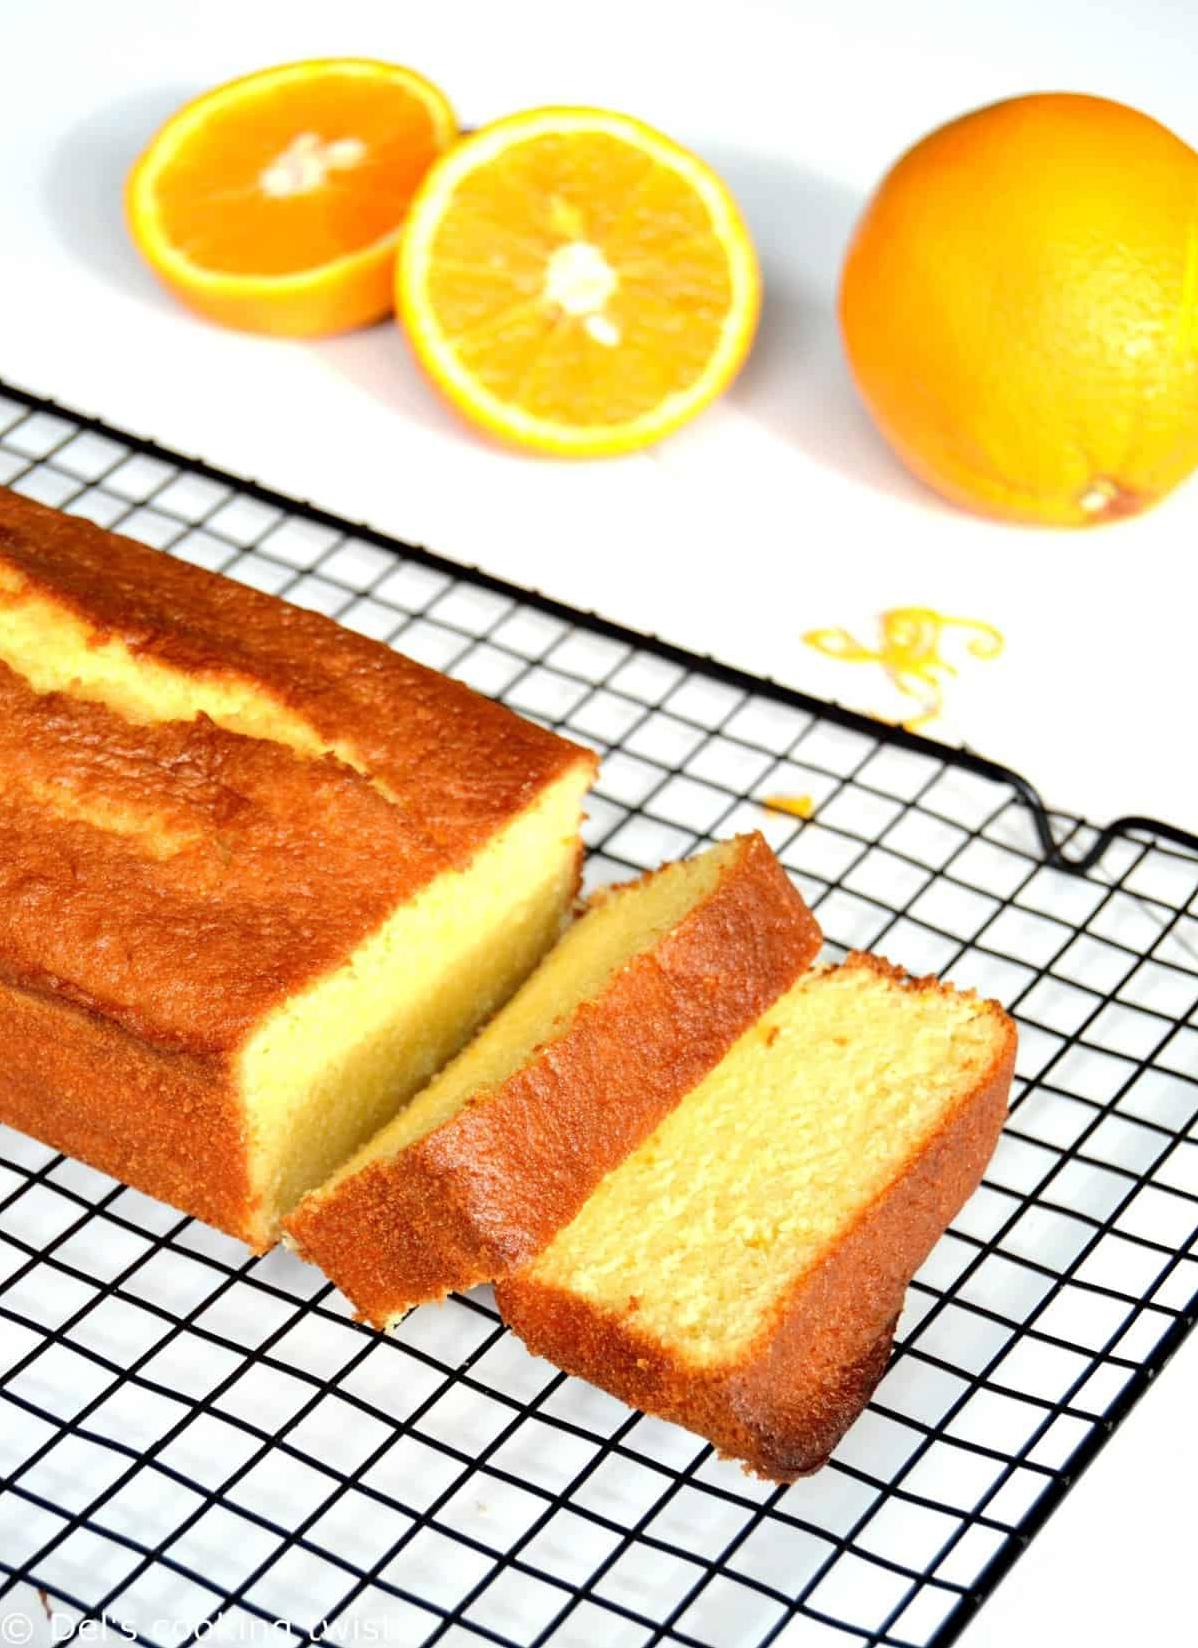  Moist and flavorful, this Orange Pound Cake is a crowd-pleaser!